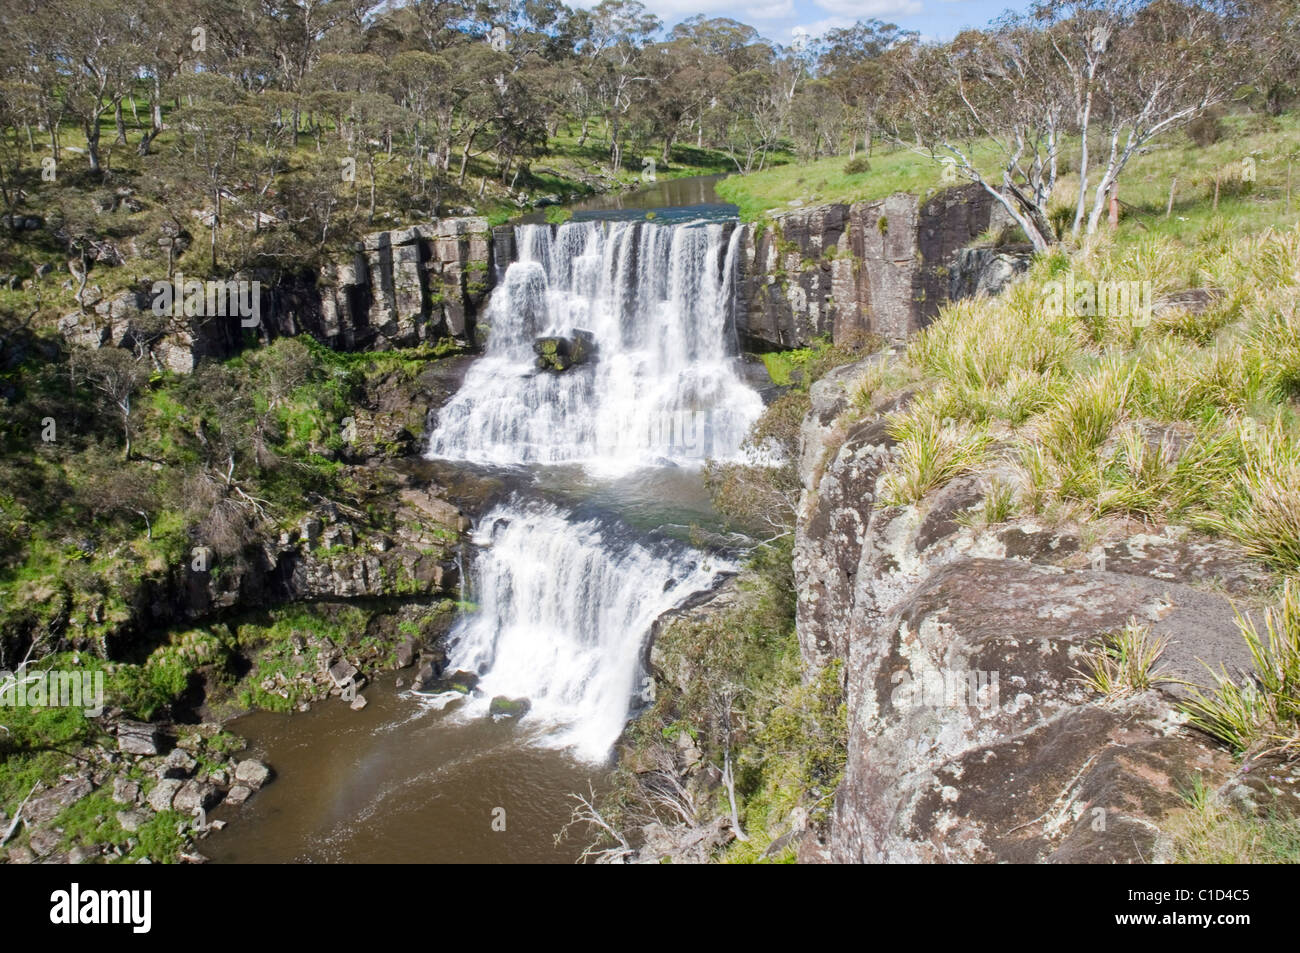 Ebor Falls on the Guy Fawkes River in New South Wales Australia Stock Photo